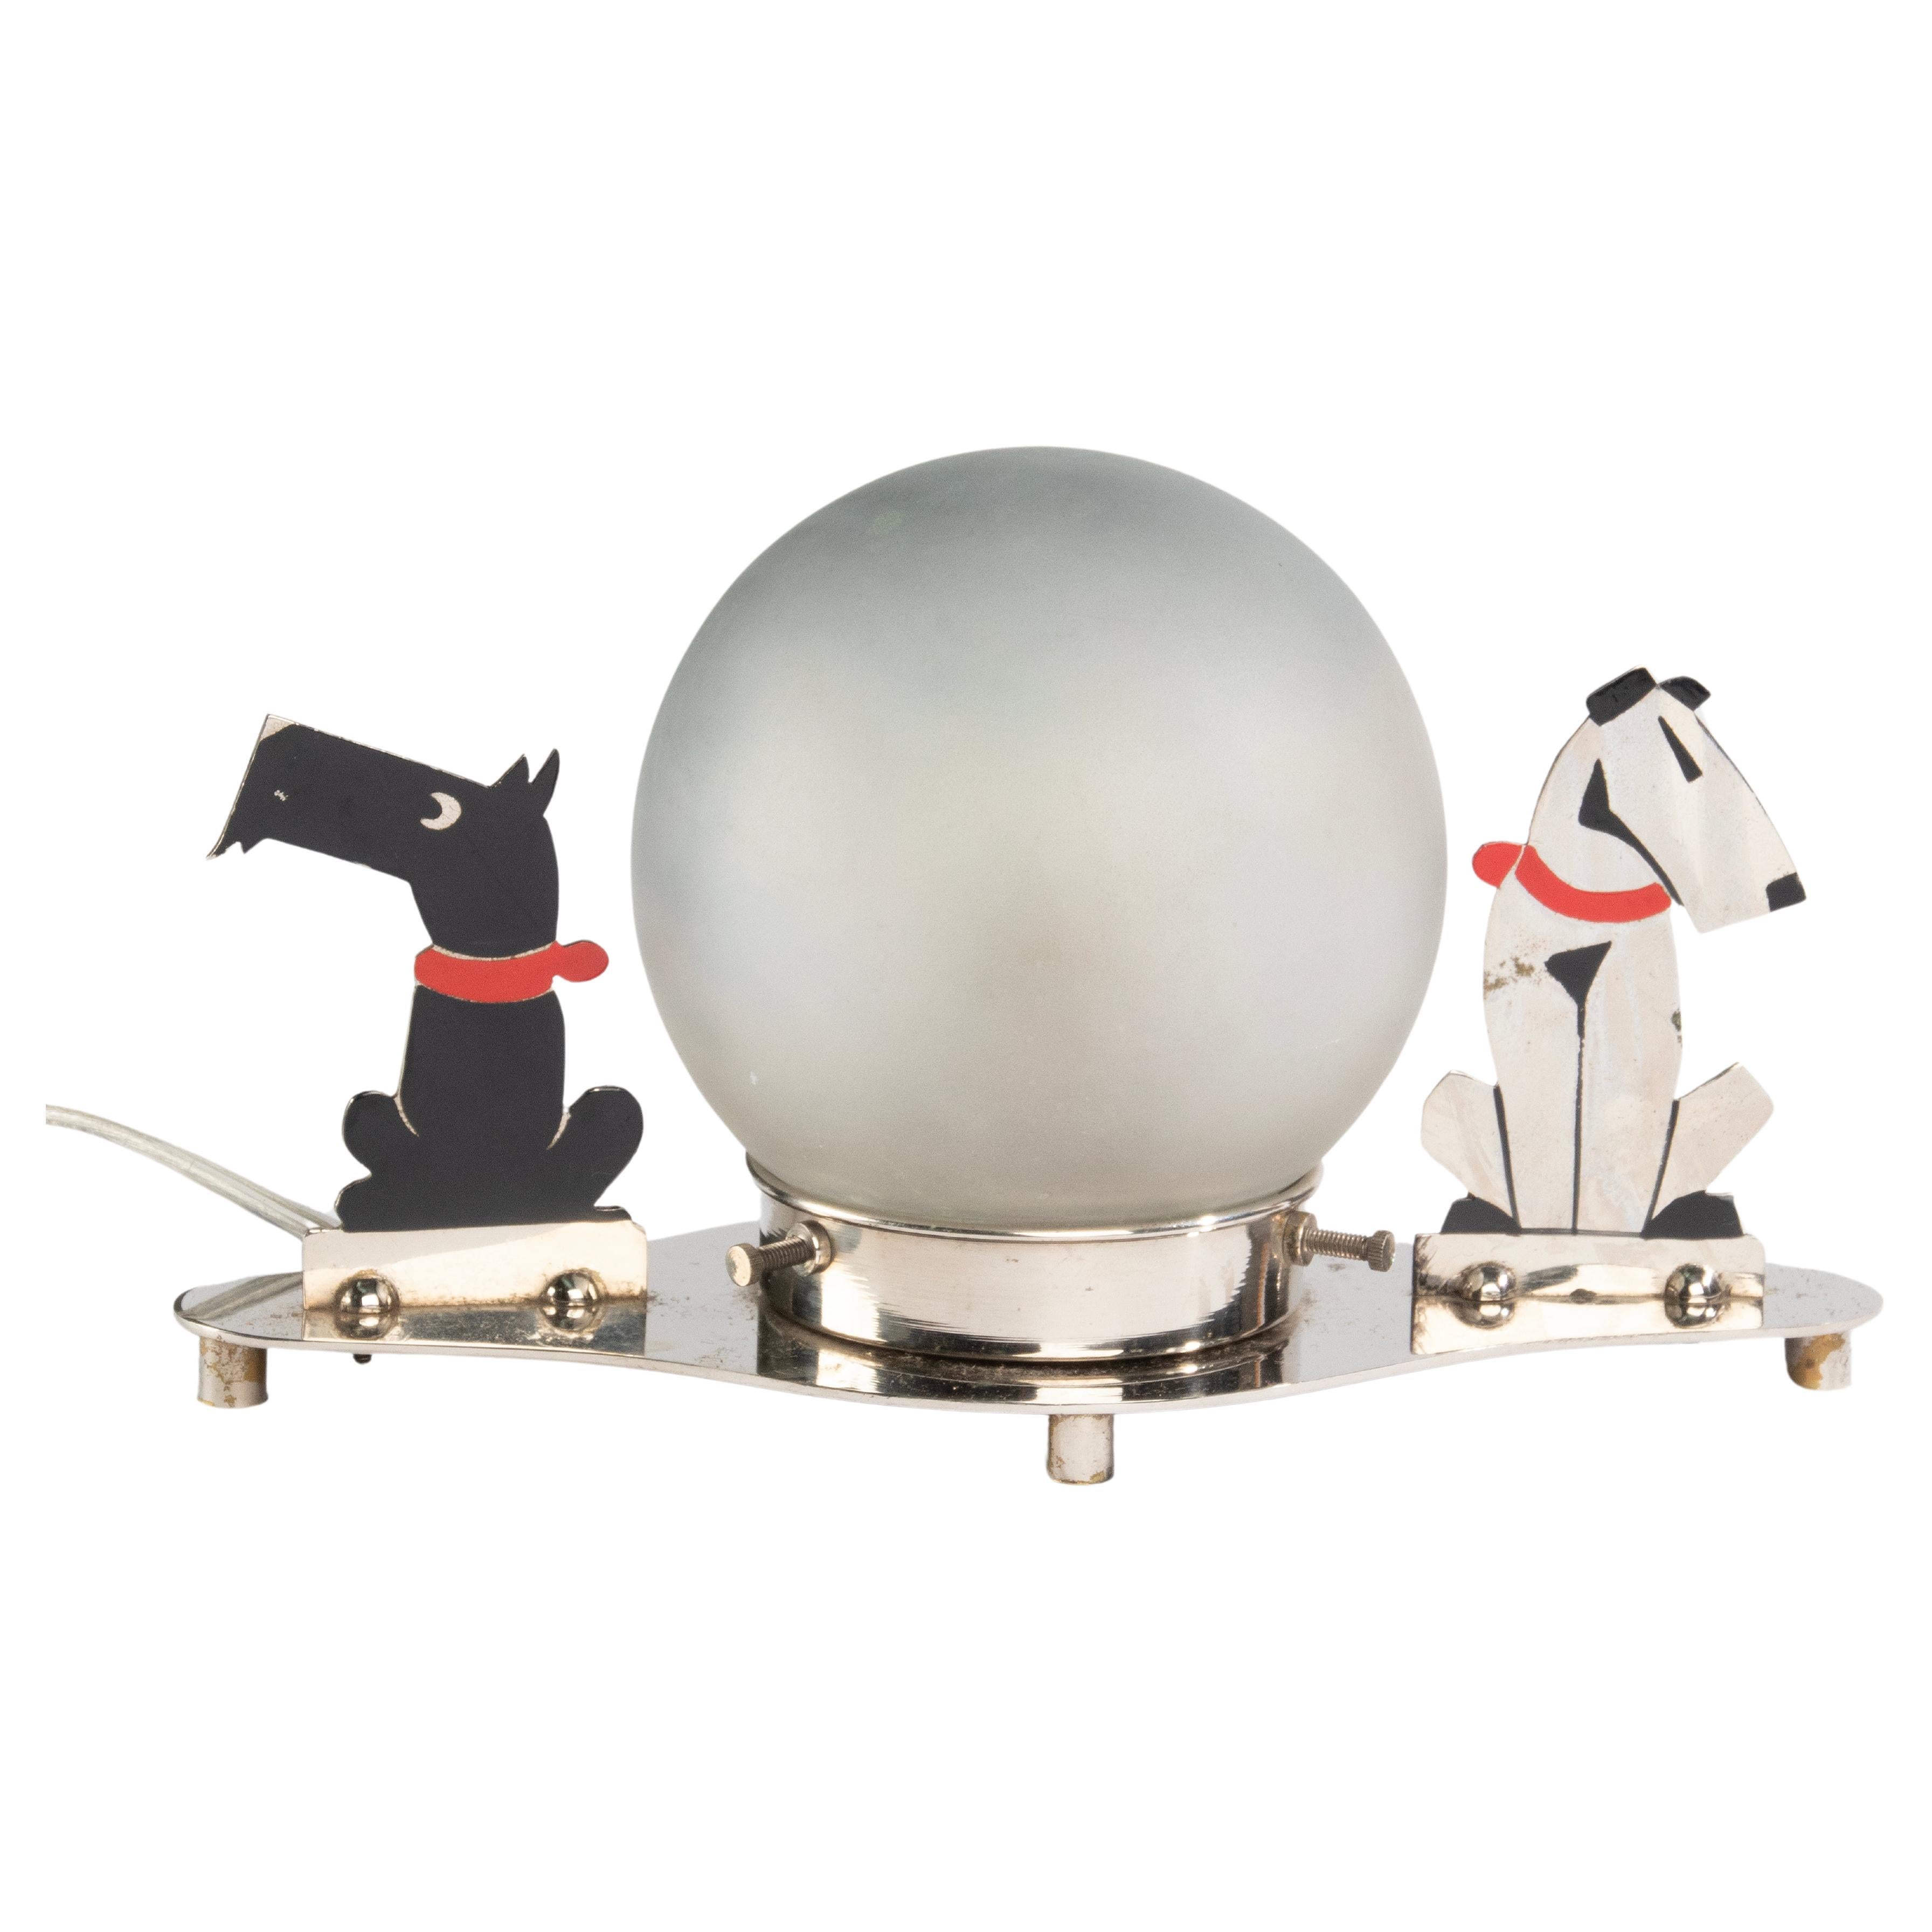 Art Deco Table Lamp with Dogs - Black and White For Sale